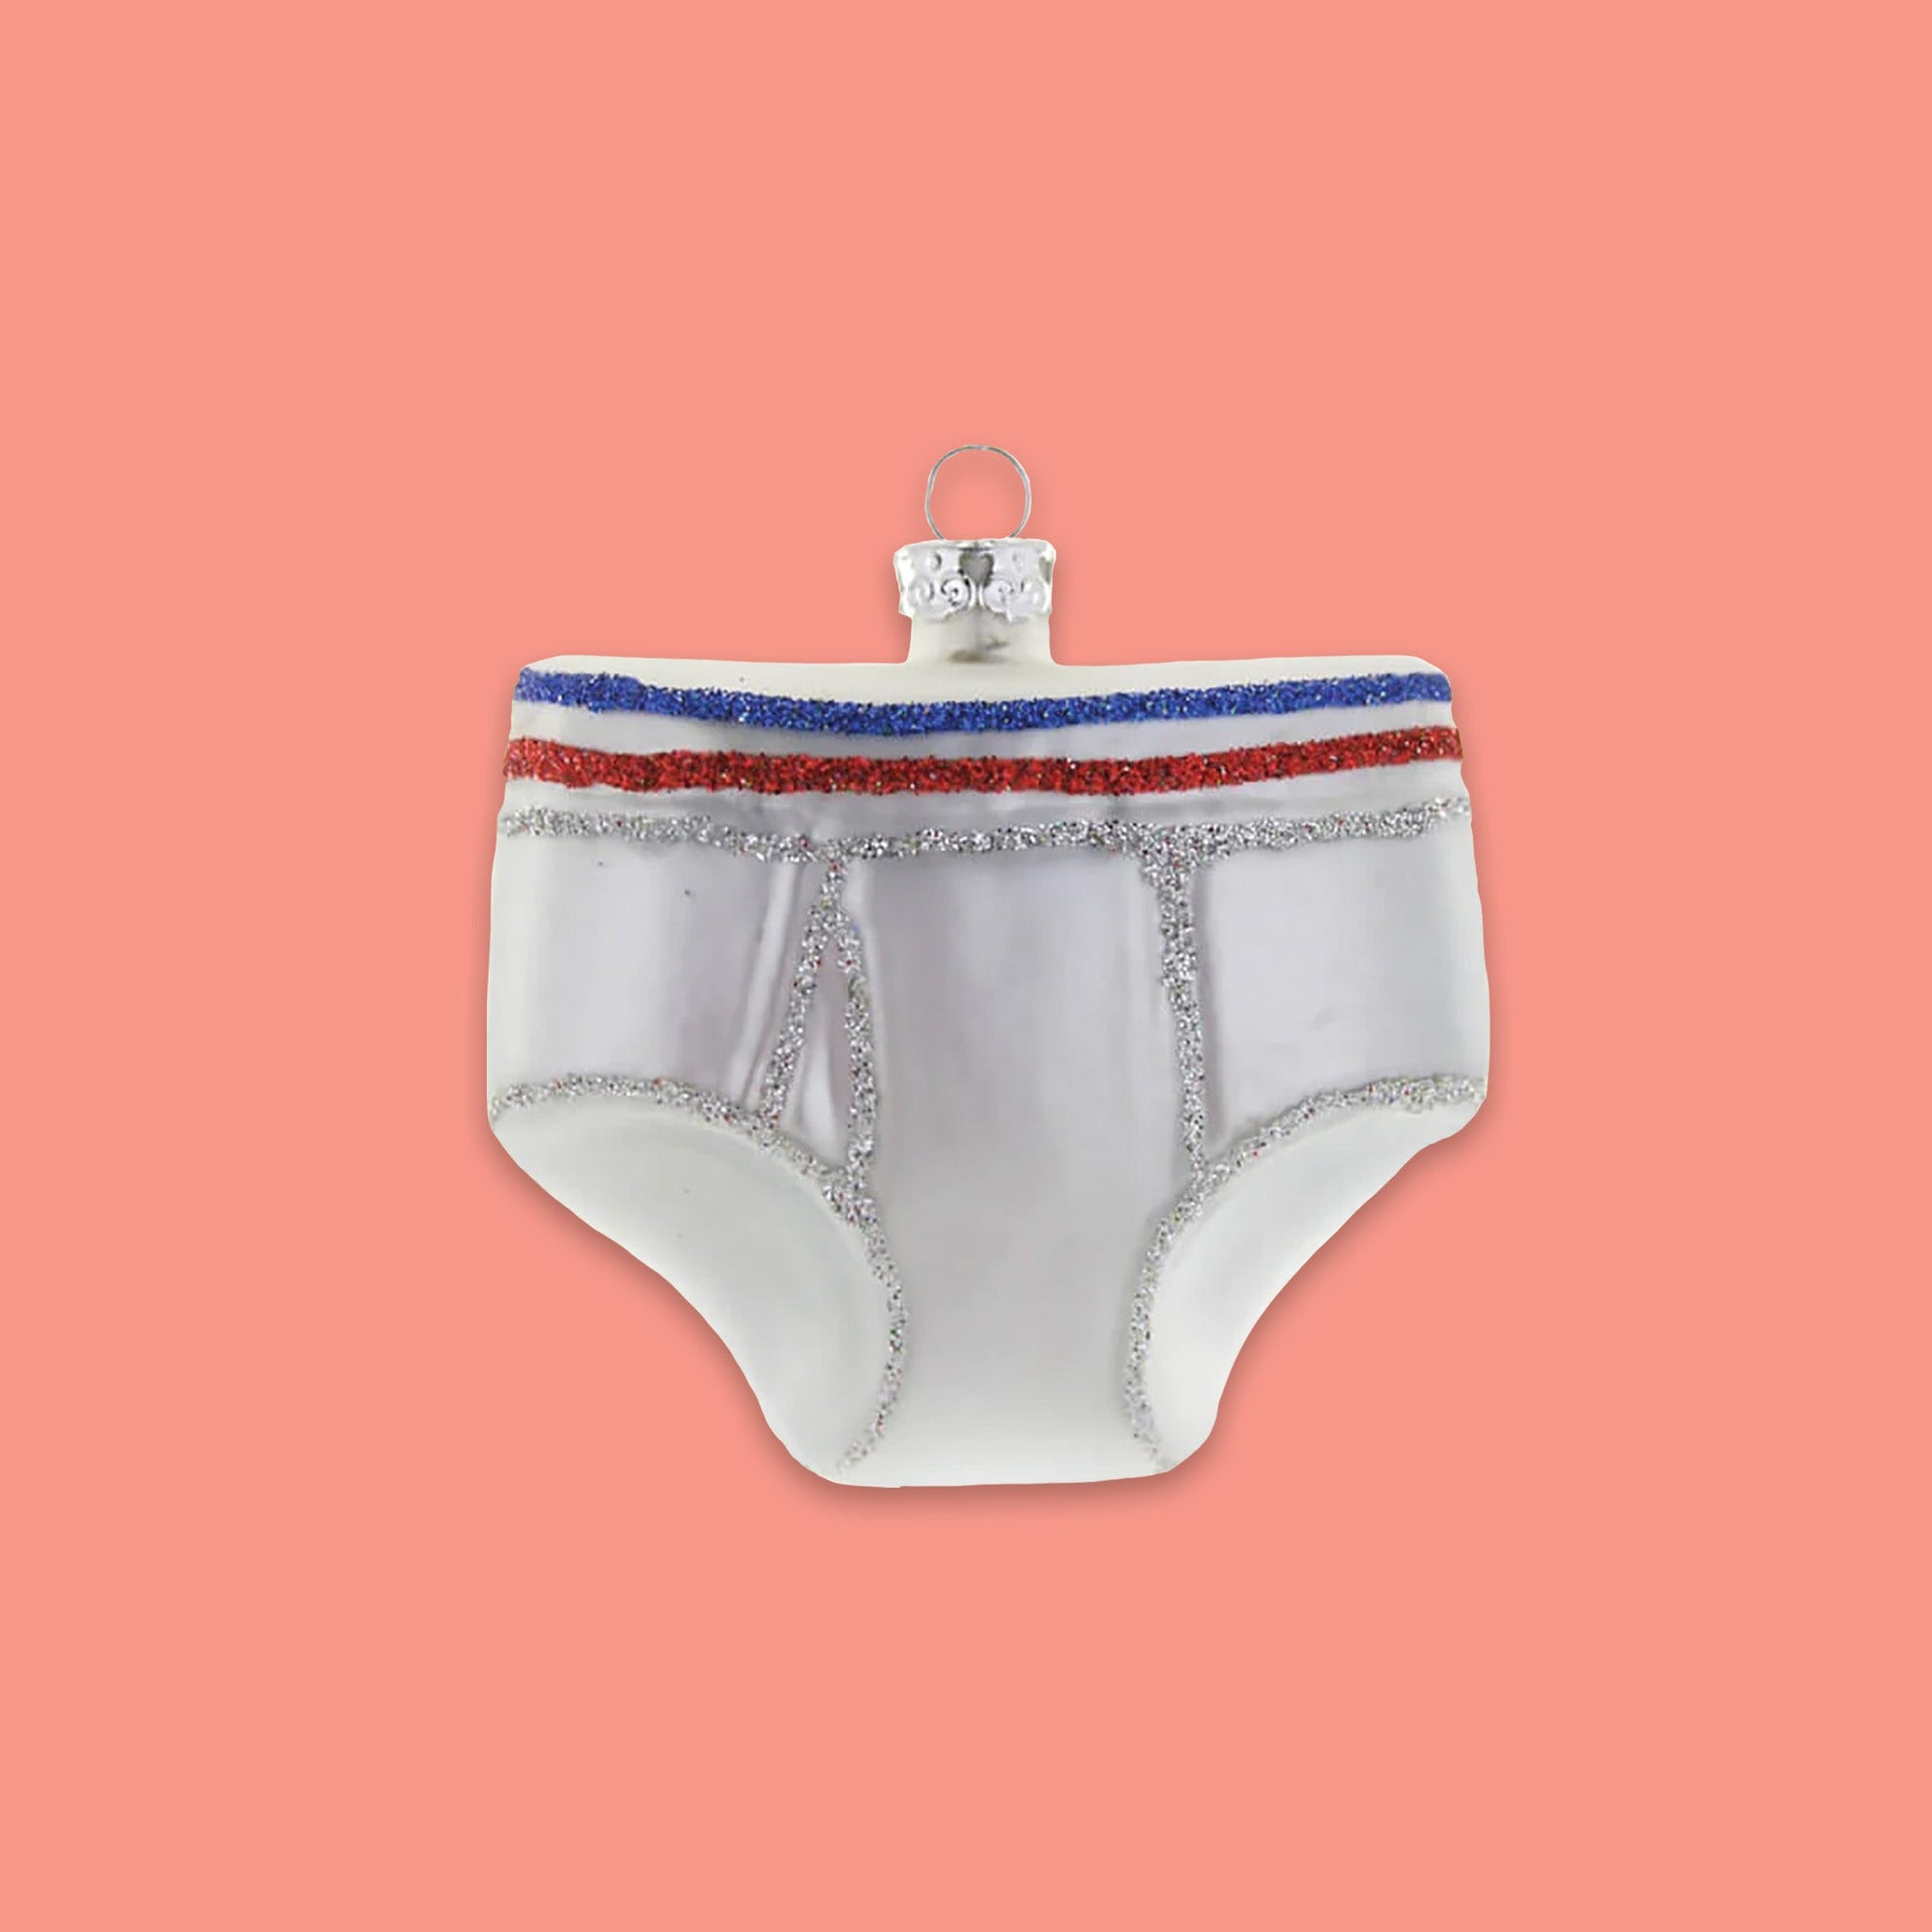 On a coral pink background sits a glass ornament of a pair of men's underwear. It is white with blue, red, and silver glitter stripes in the band.